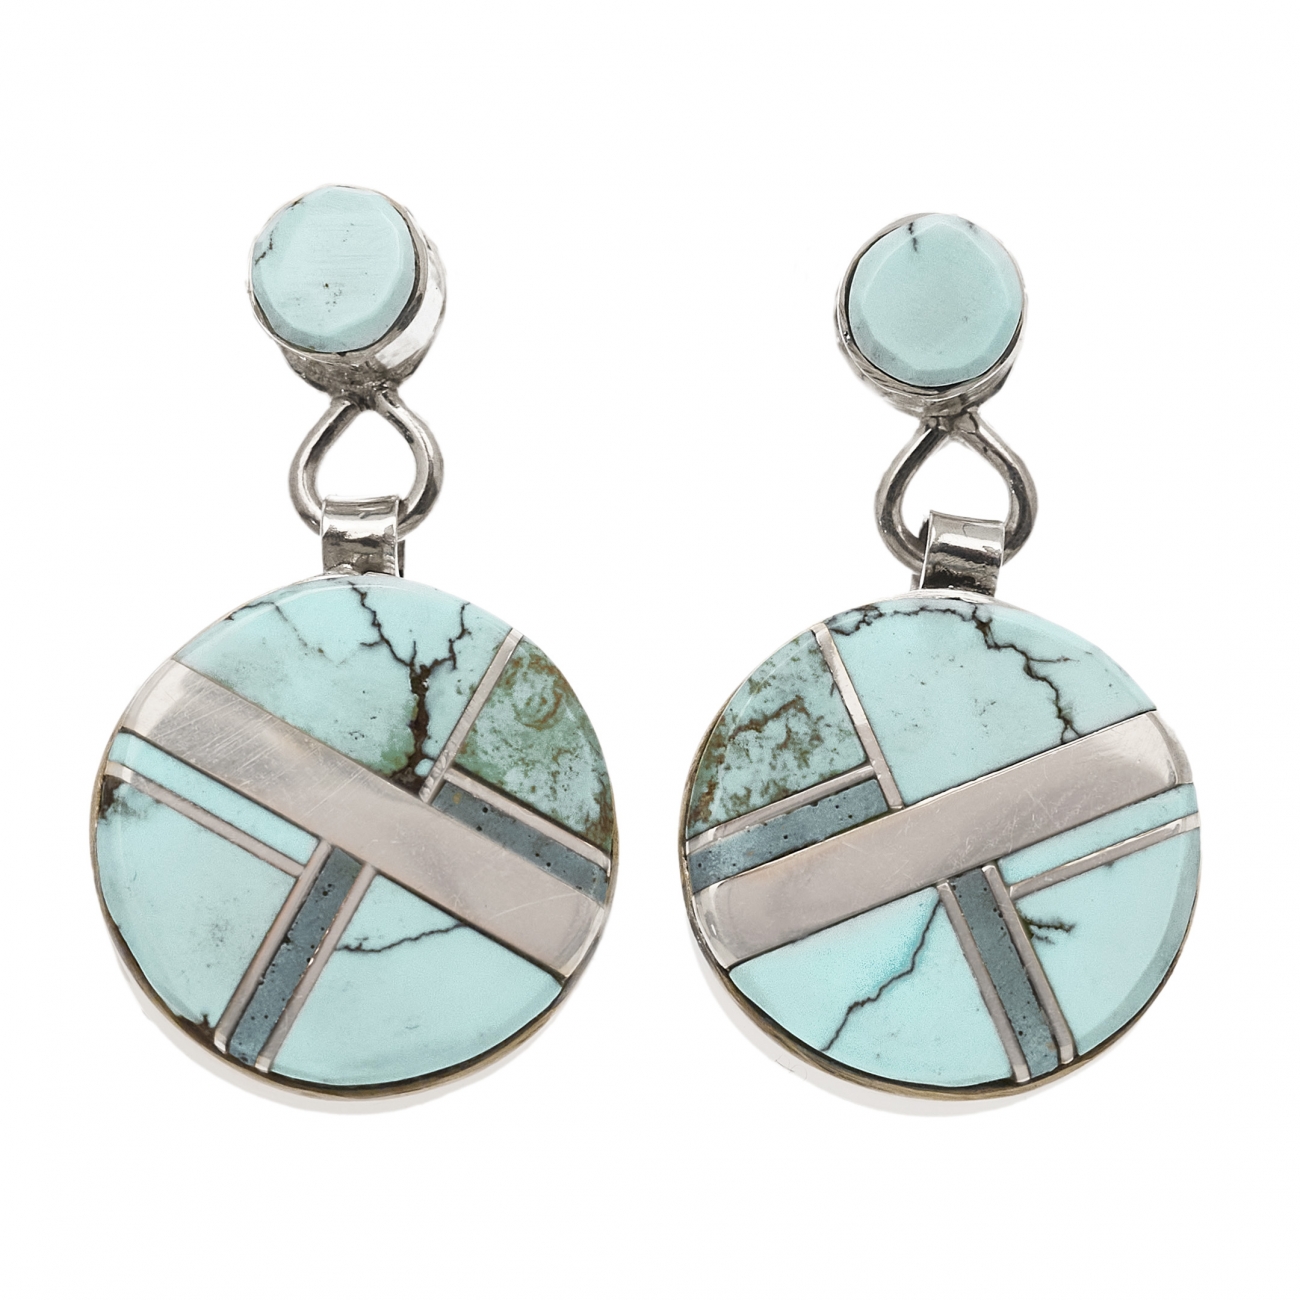 Earrings BO347 in turquoise and silver inlay - Harpo Paris